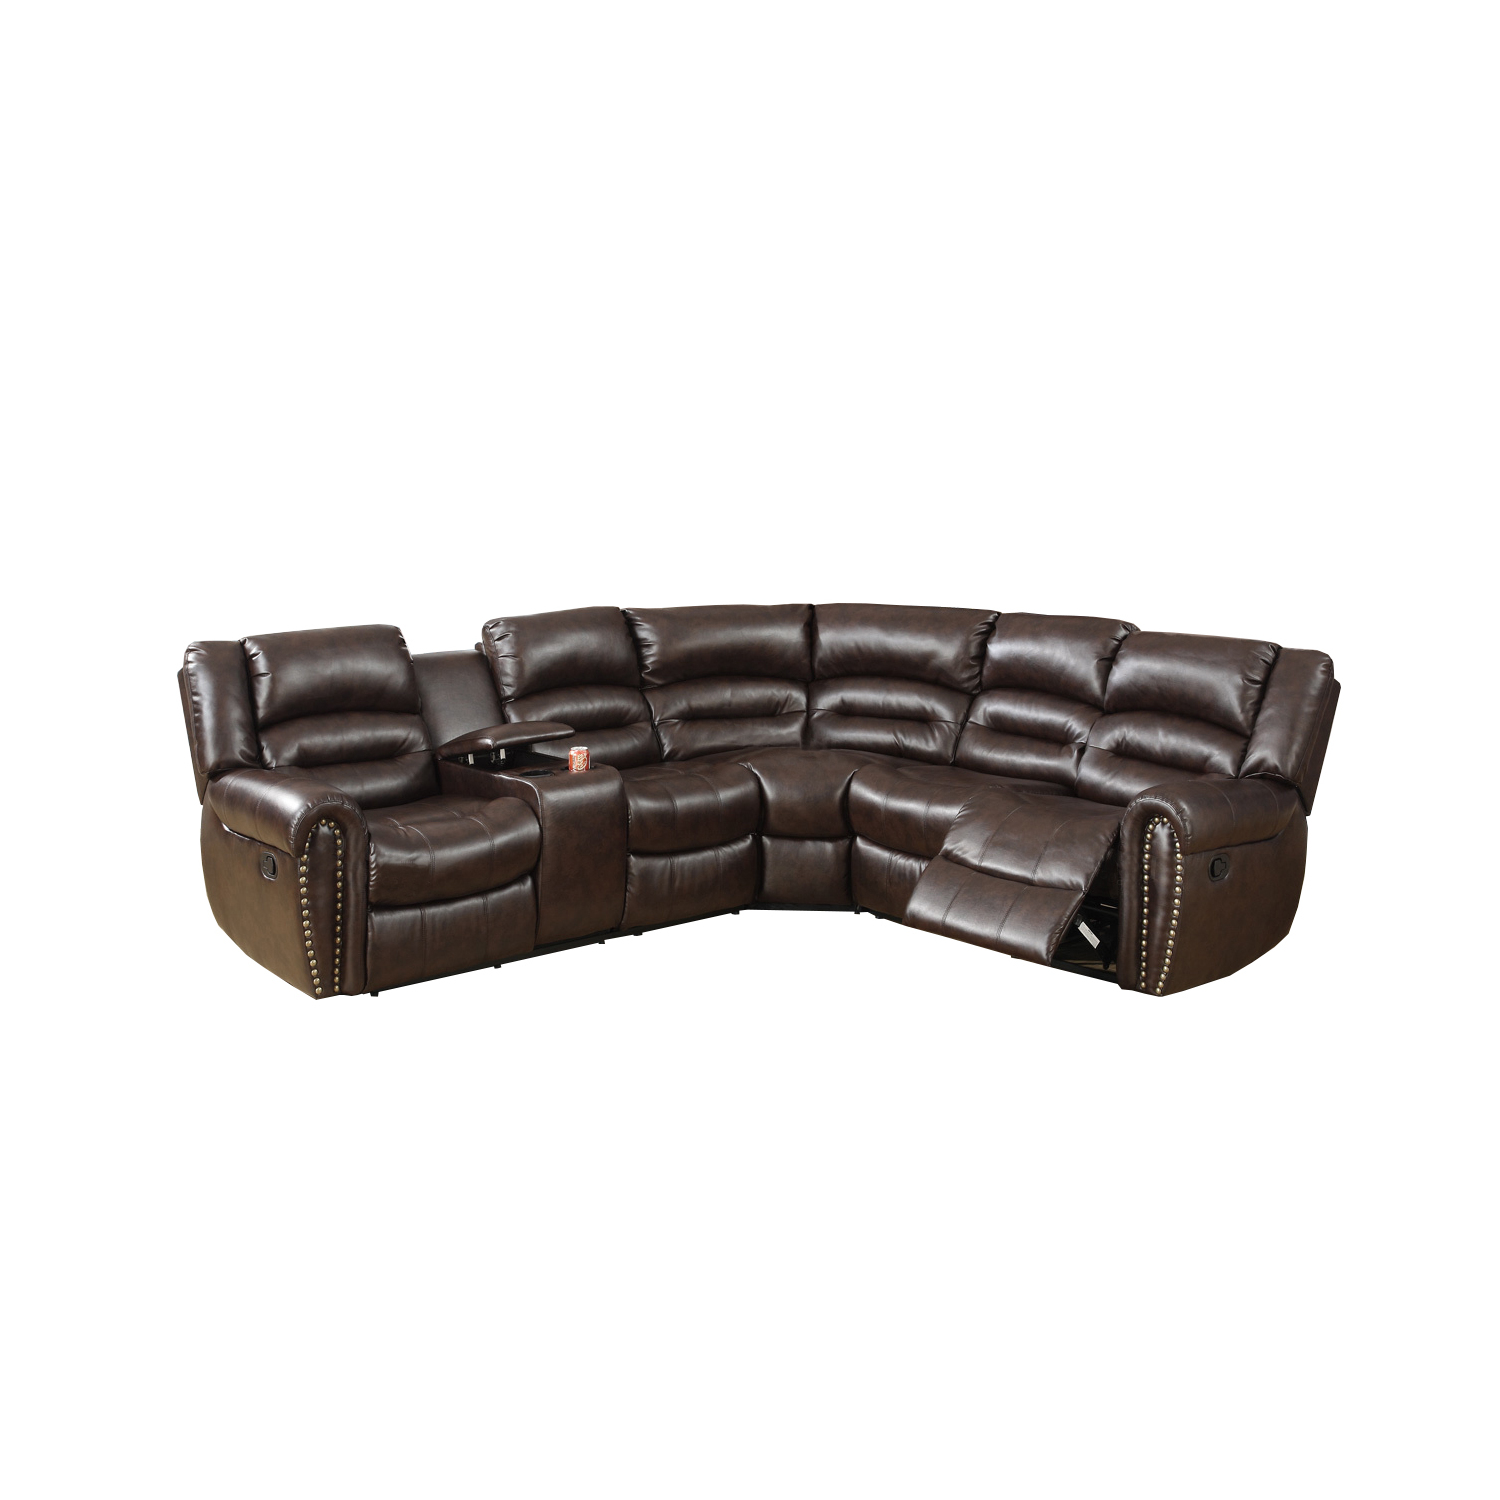 Benjara 3-Piece Modern Bonded Leather Reclining Sectional in Brown - image 2 of 2